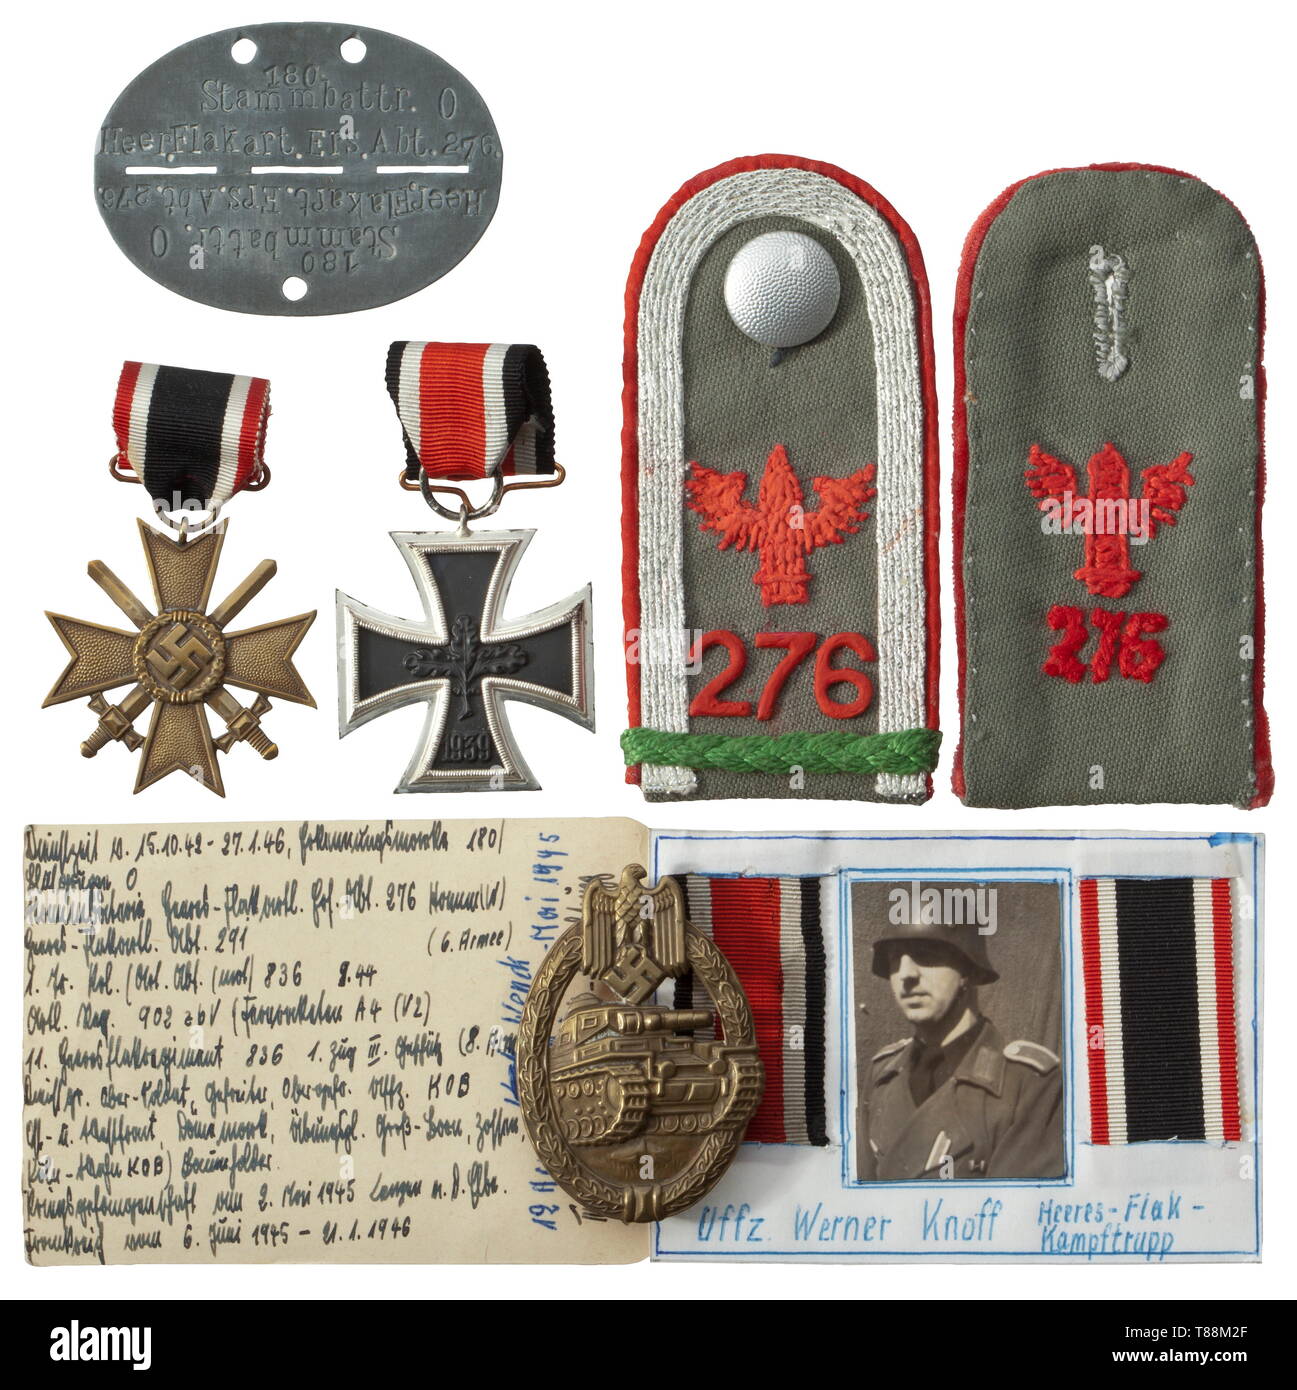 A grouping of Werner Knoff - 11th Company, Army Anti-Aircraft Regiment 836 A jacket for assault gun crews of grey-green woollen material. Slip-on shoulder boards for a non-commissioned officer, private wartime officer candidate lanyard (KOB). Red piping and hand embroidered grenade with '276' designation. Unit collar tabs on collar patches piped in red. Ribbon for the War Merit Cross 2nd Class, stitched-on Iron Cross 2nd Class ribbon, visible national eagle silhouette. The lower jacket shortened at the time and reinforced with additional material. Grey silk inner liner, no , Editorial-Use-Only Stock Photo